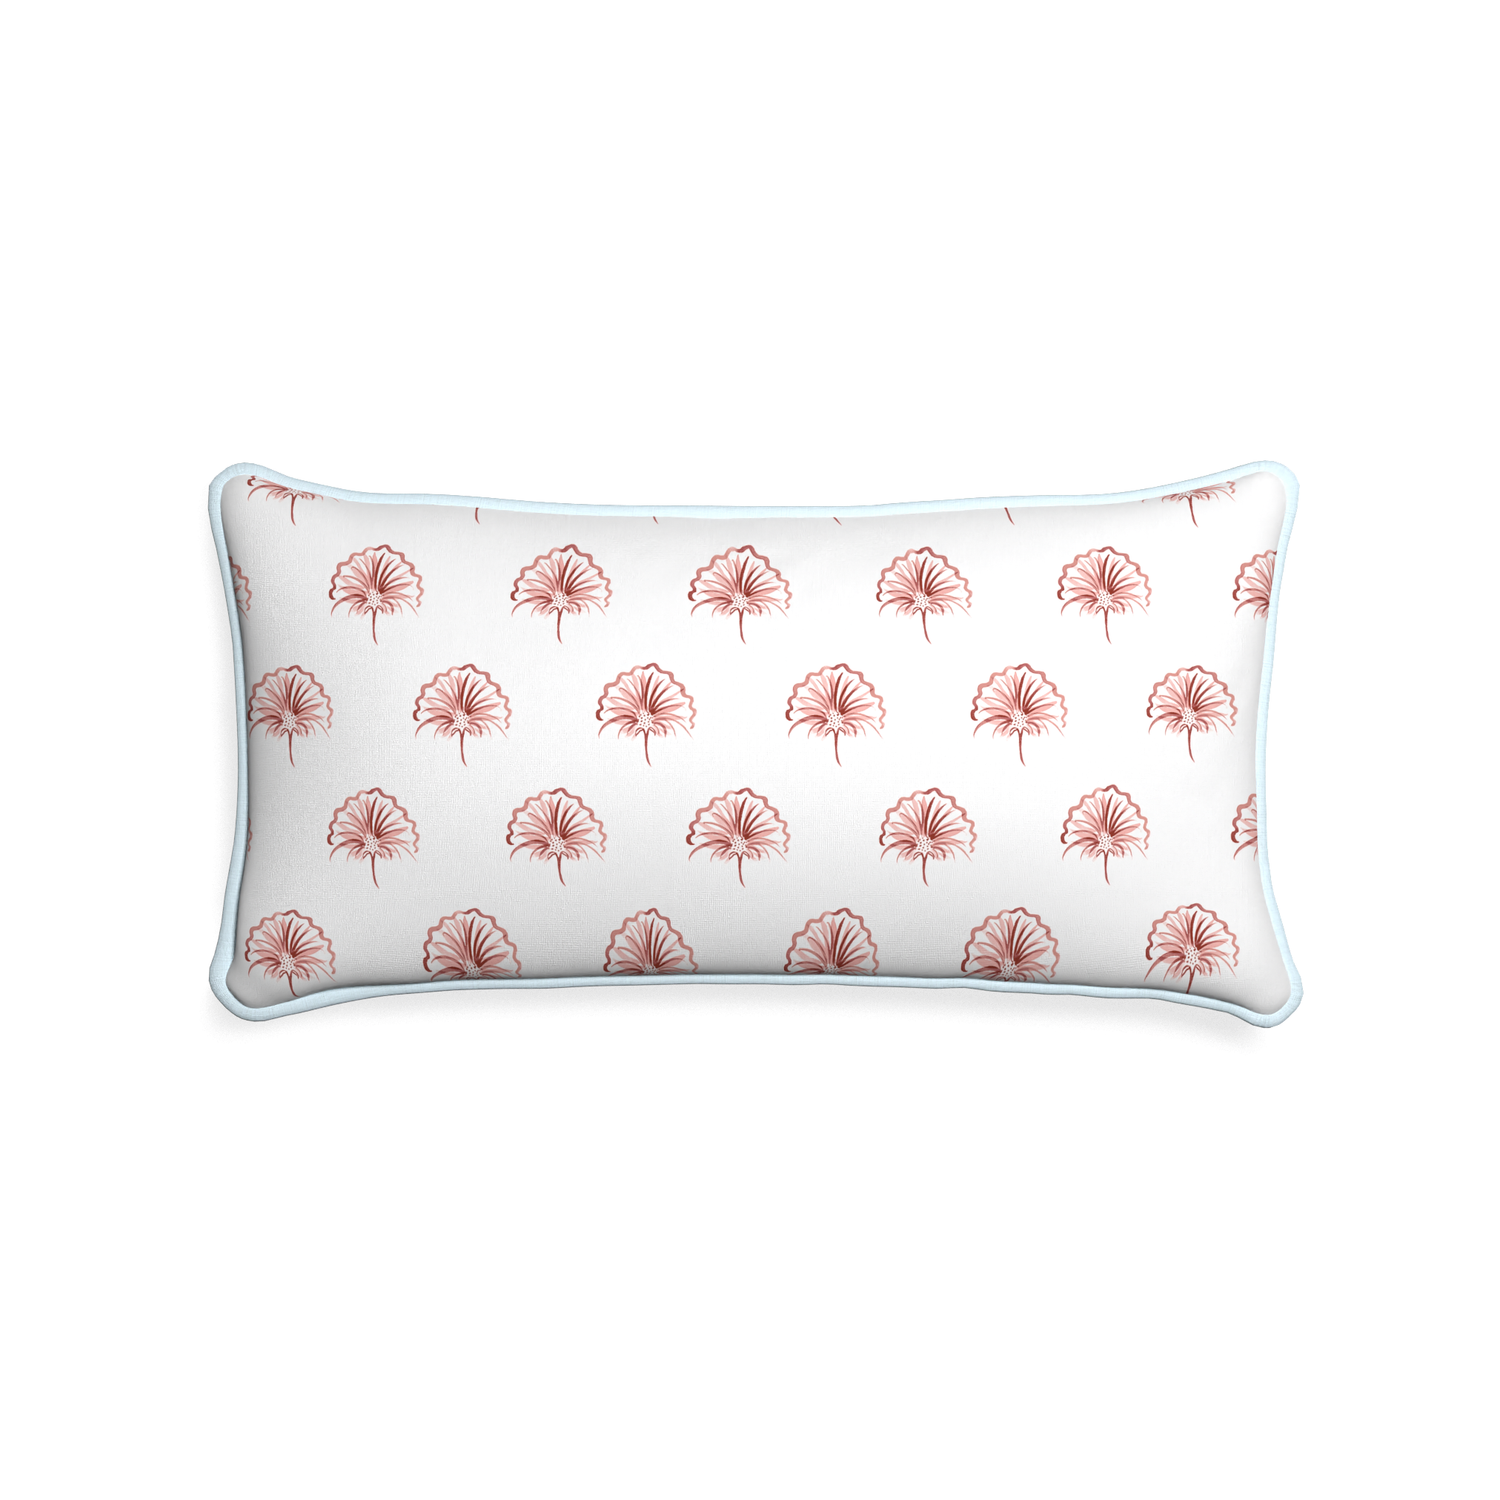 Midi-lumbar penelope rose custom floral pinkpillow with powder piping on white background